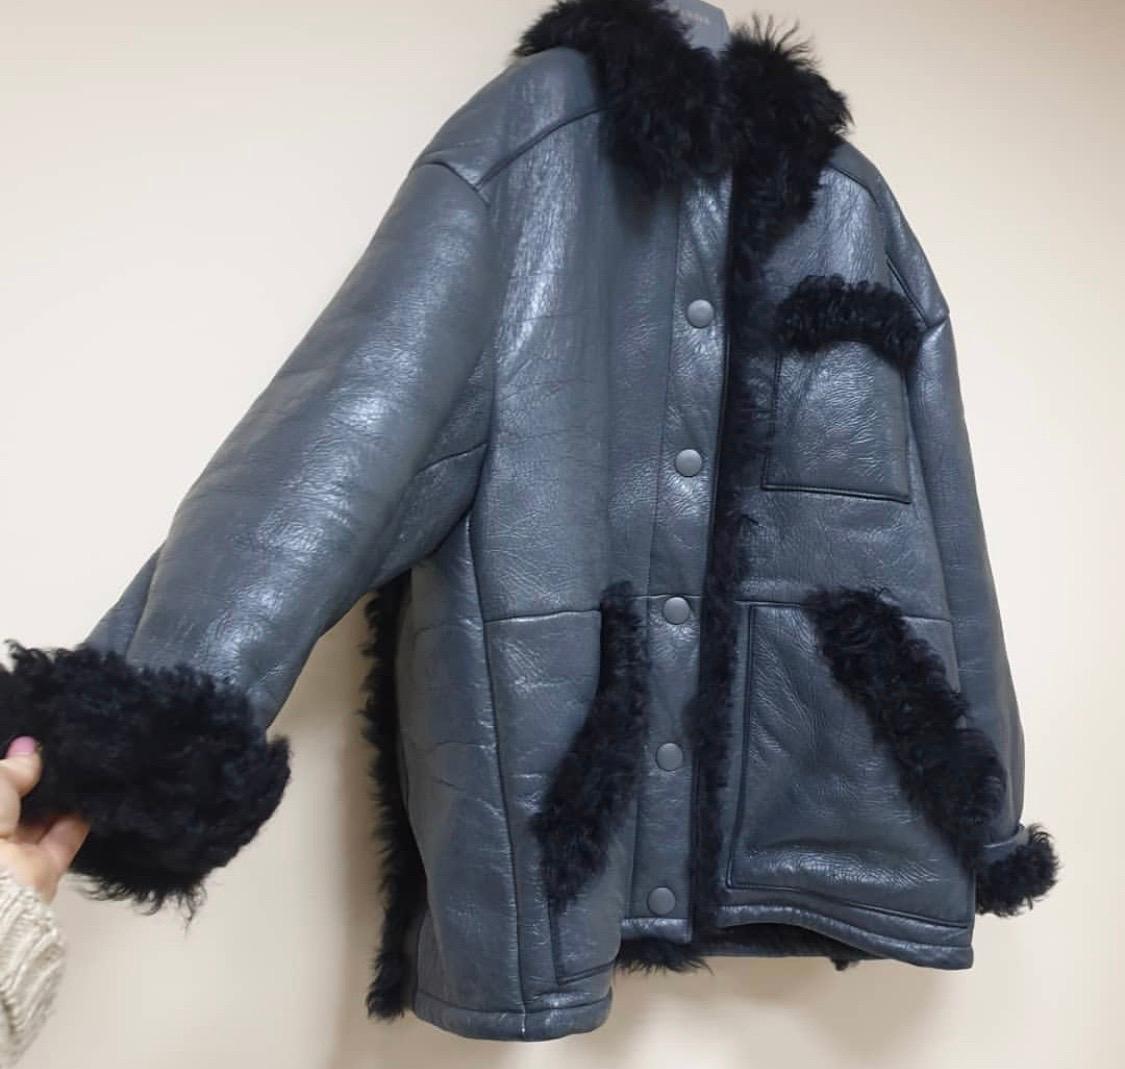 Prada Fur Trimmed Winter Leather Jacket
Worm and gorgeous coat/jacket.
Sz.40 IT
Very good condition.